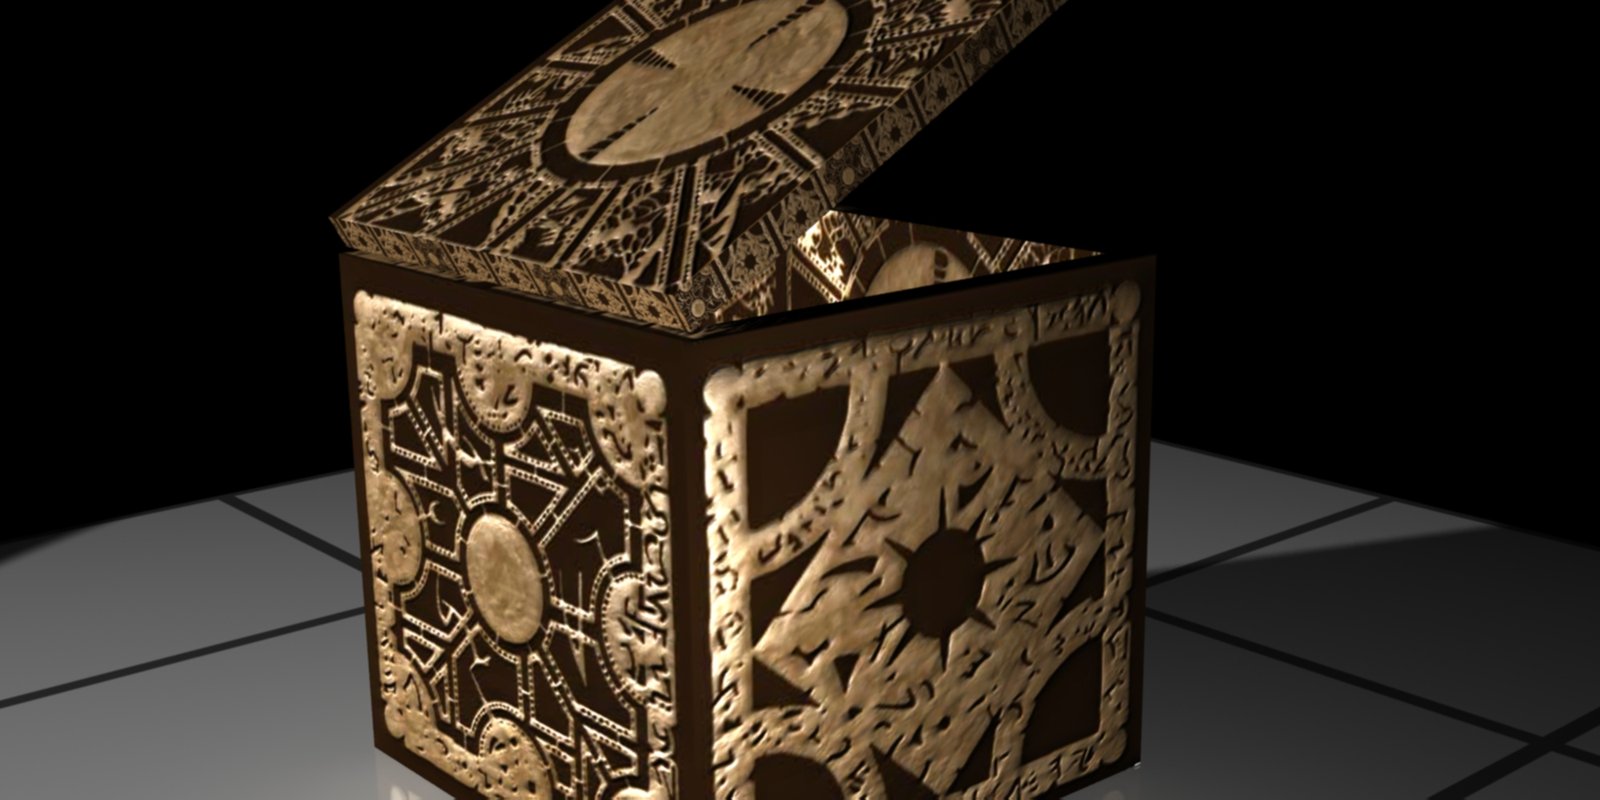 Crafting Your Puzzle Box: Step-by-Step Instructions to Design a Challenging Enigma